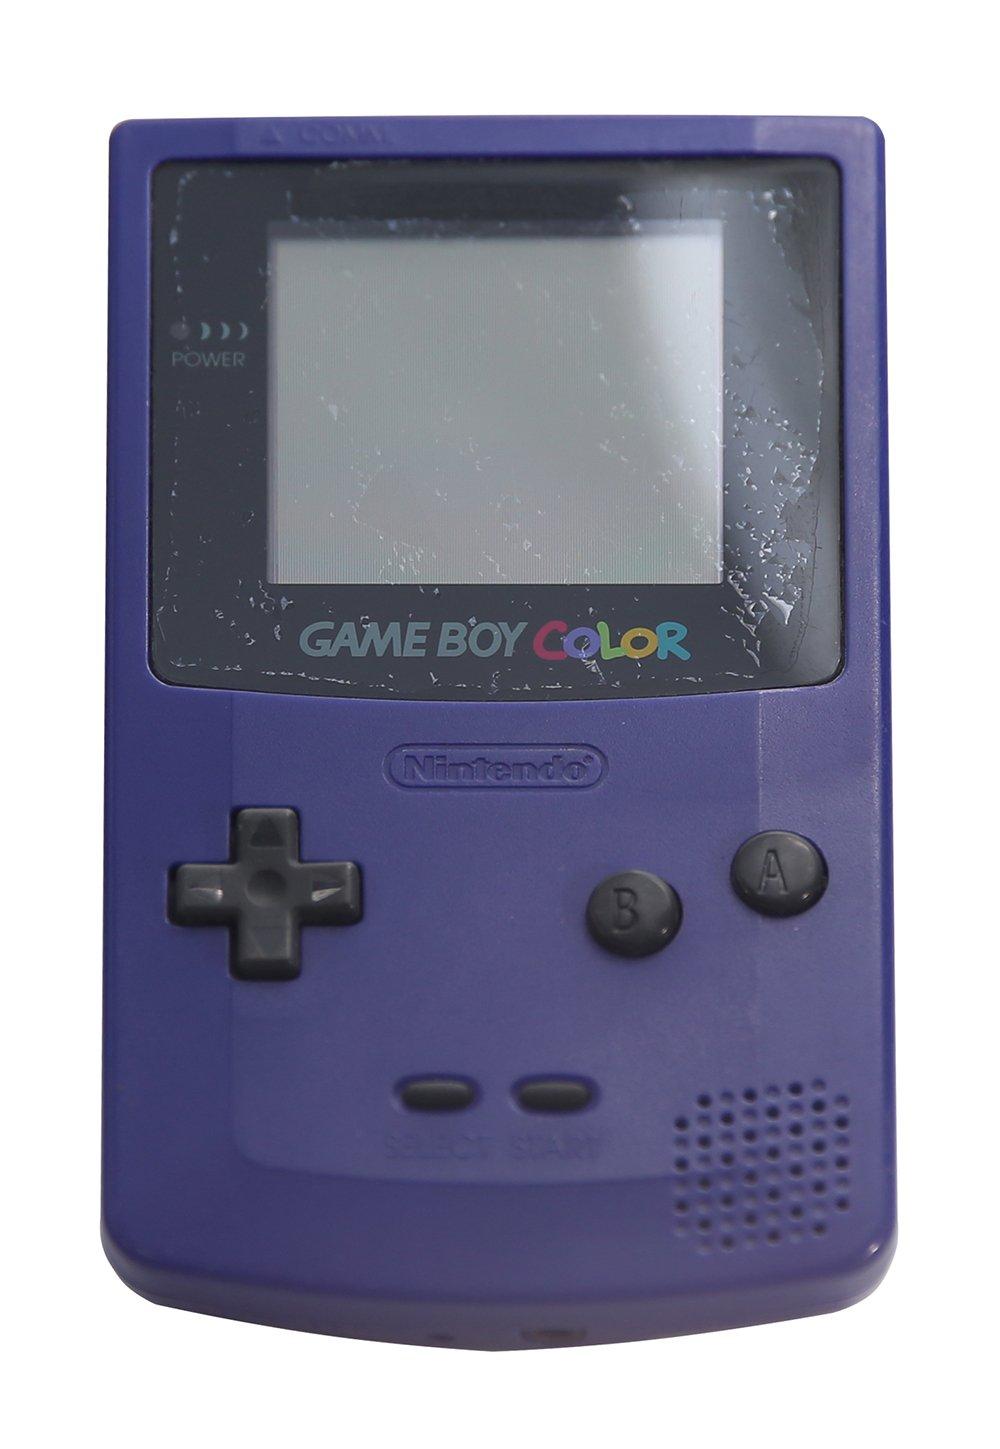 where can i buy a gameboy color